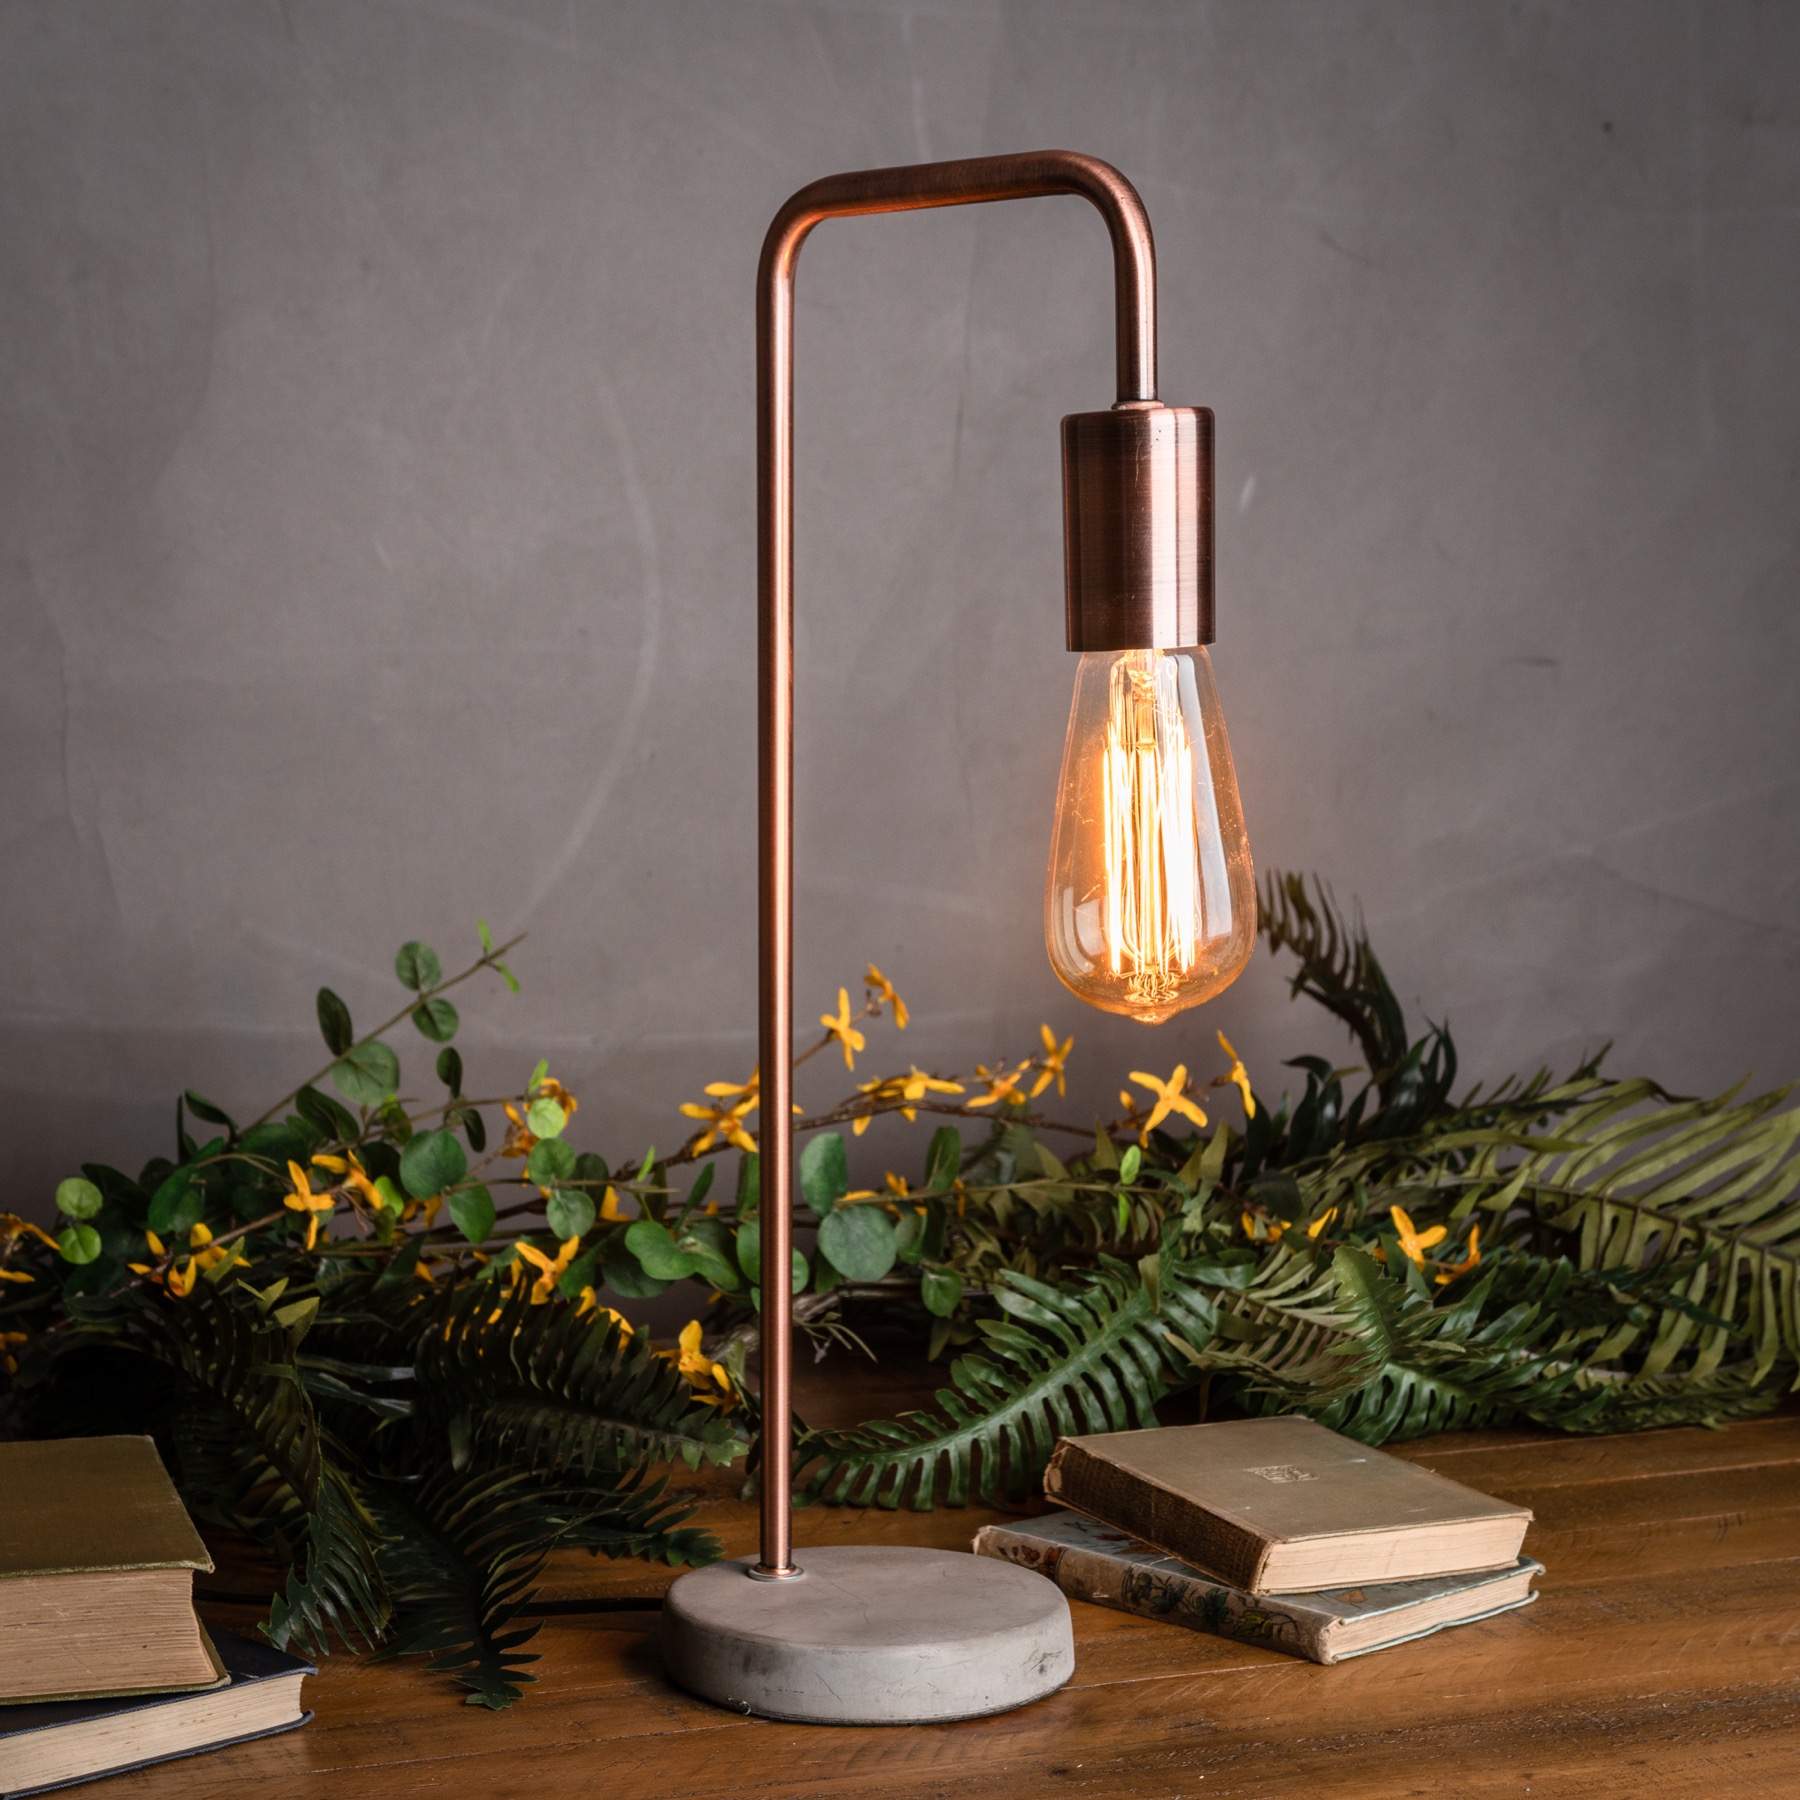 Copper Industrial Lamp With Stone Base - Image 3